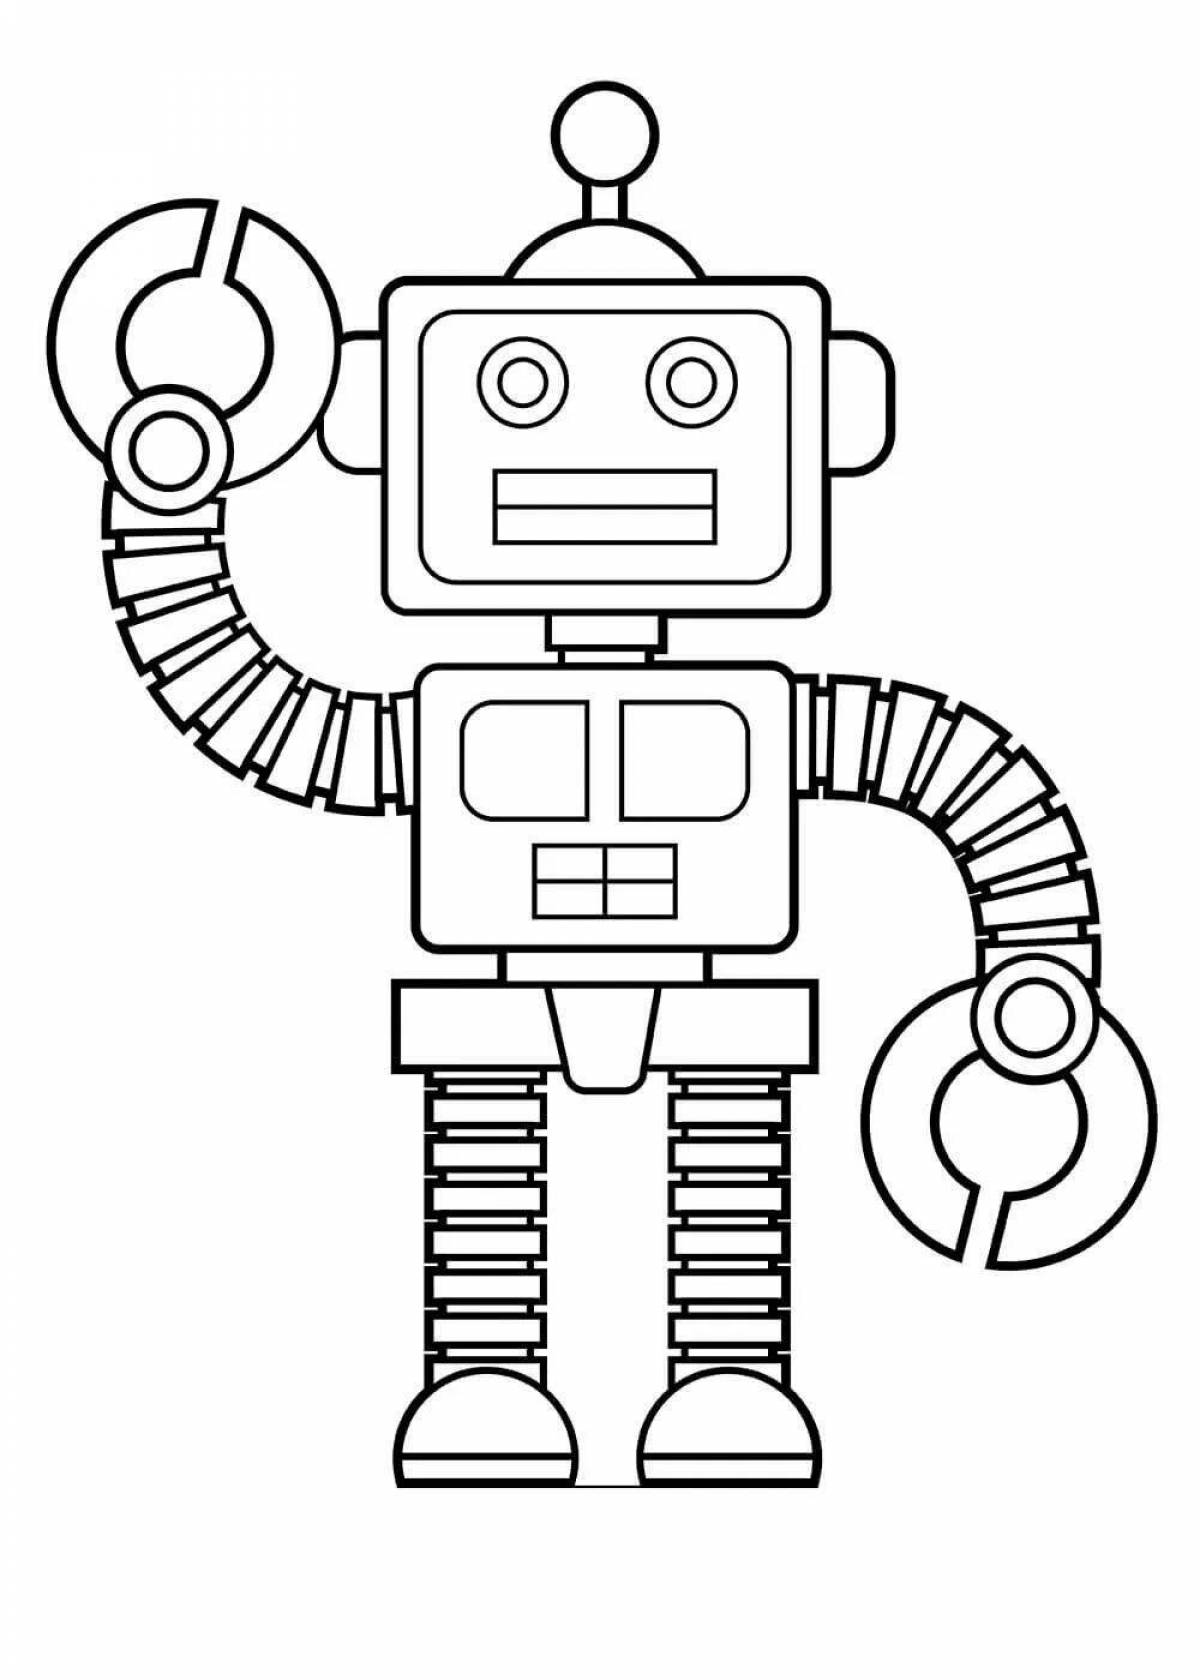 Coloring paper robot with colorful figures